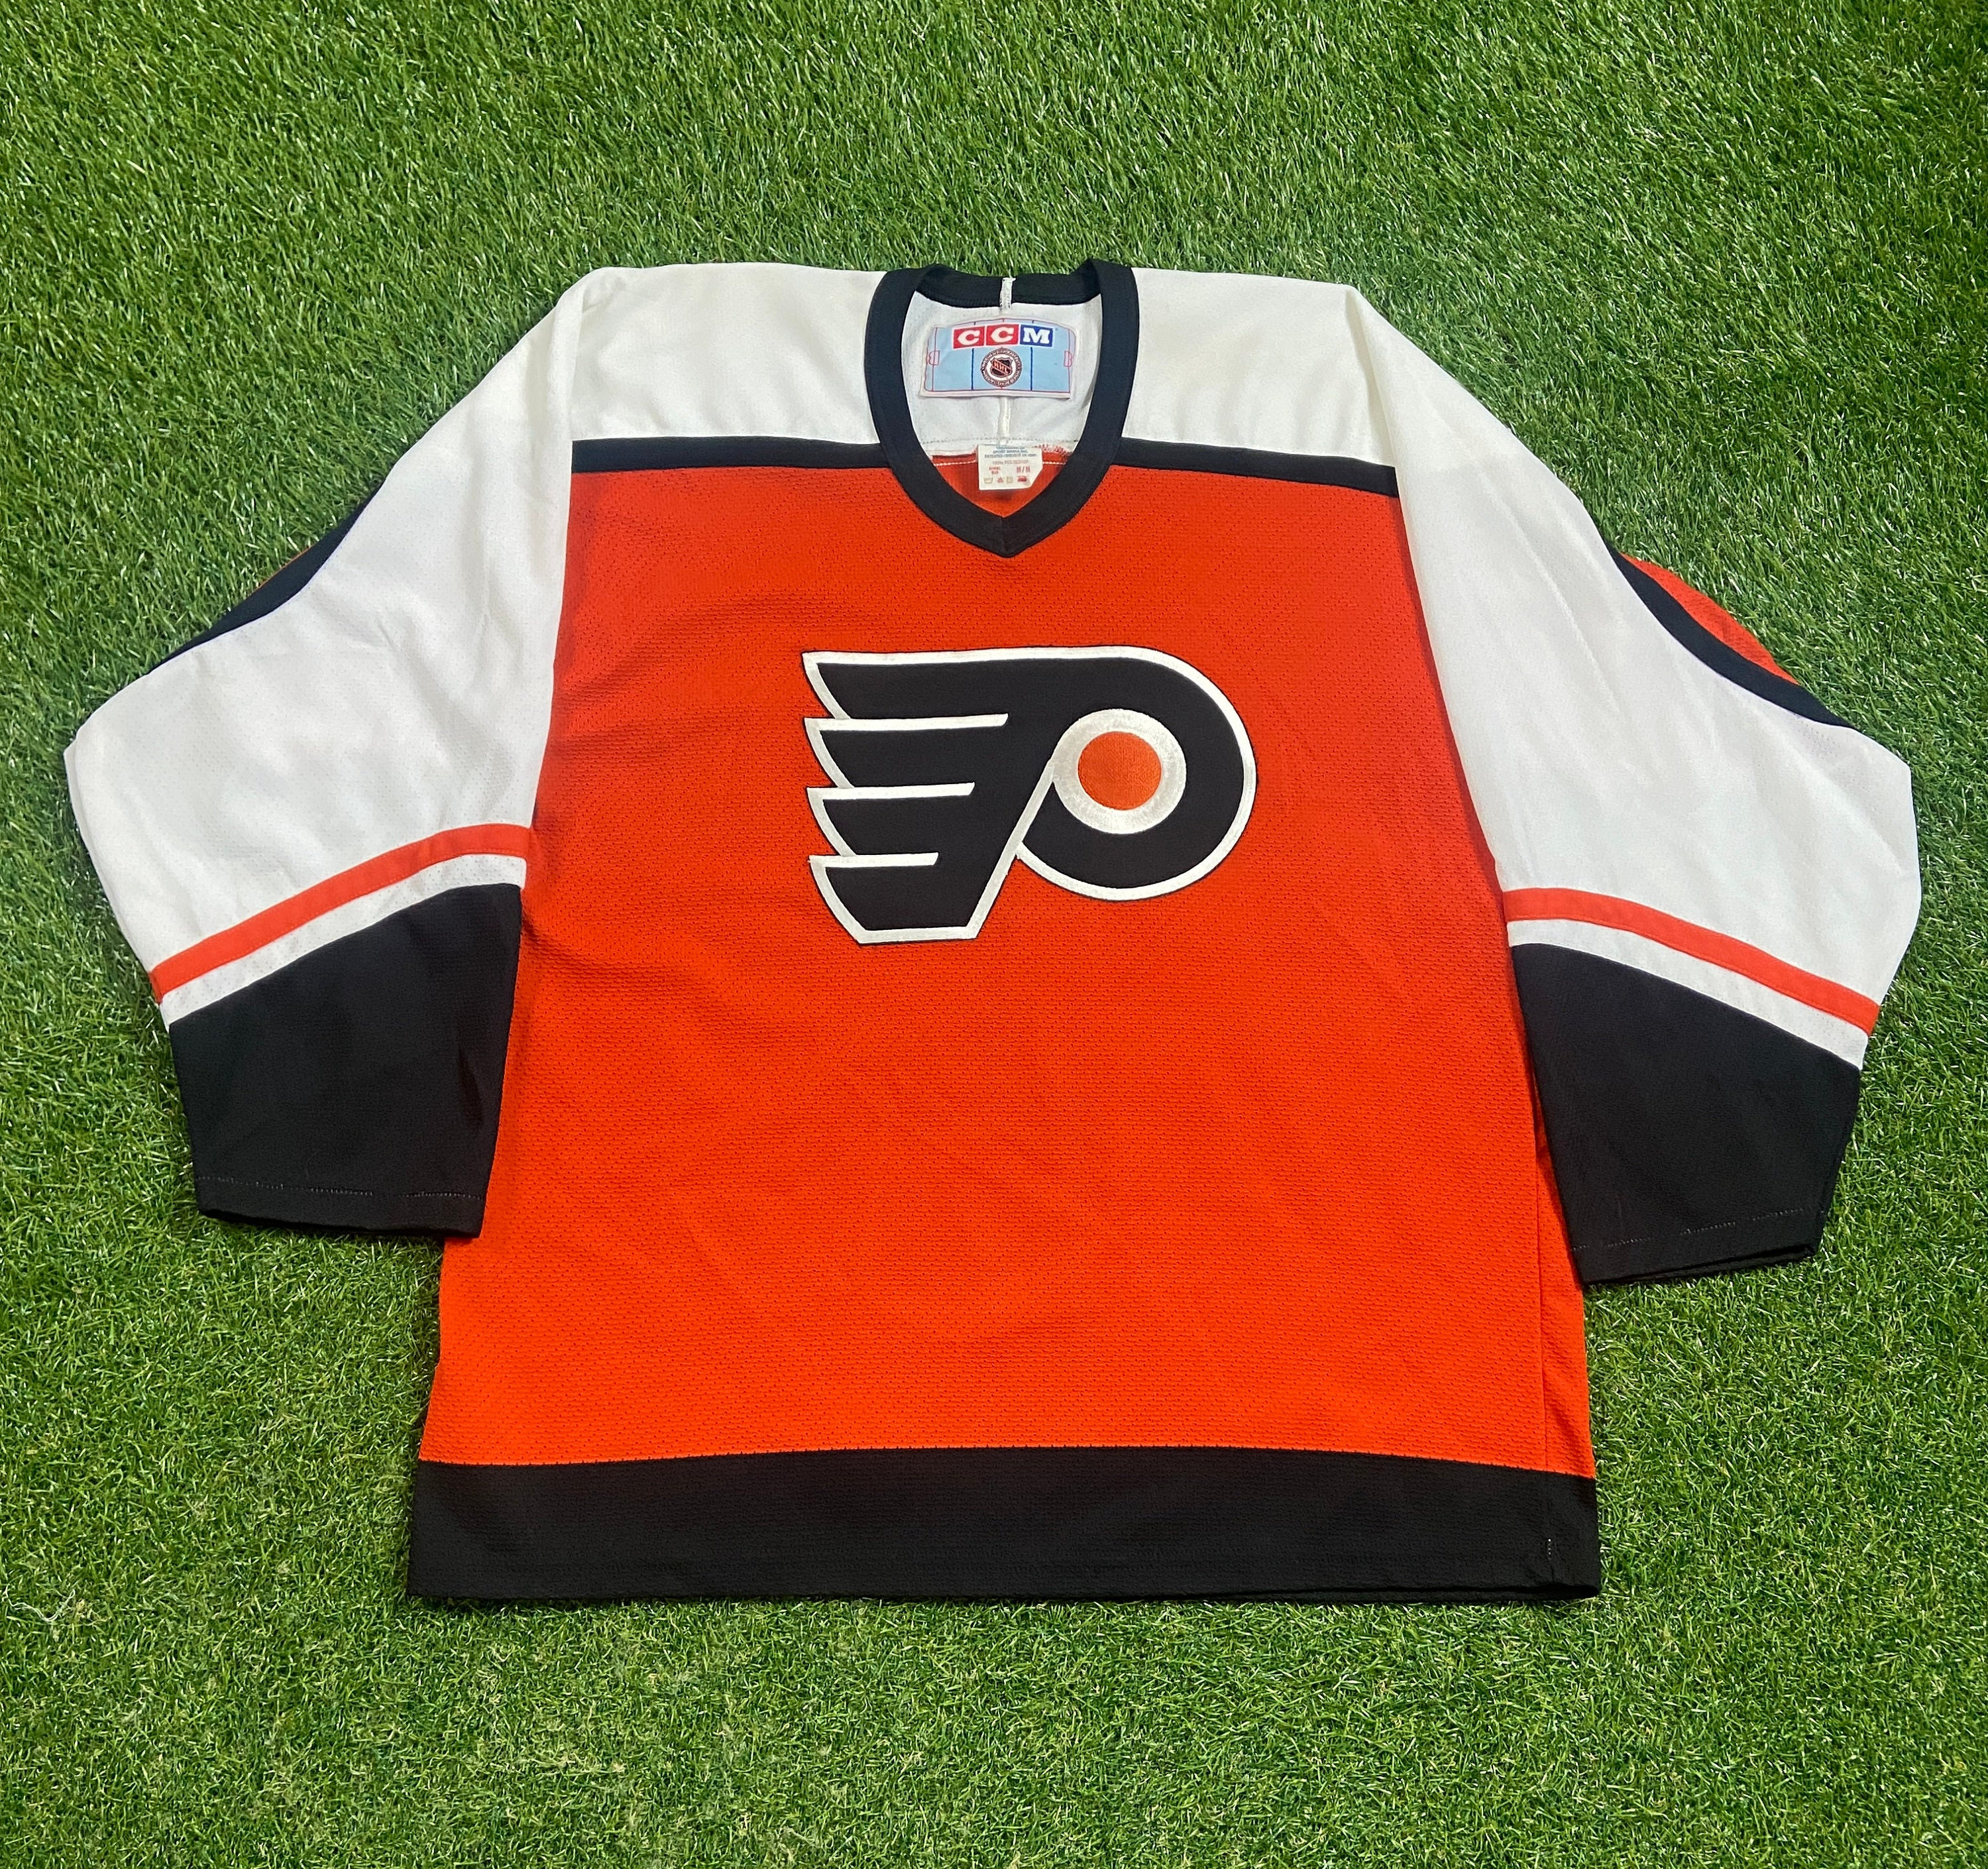 vintage offical nhl hockey jersey Philadelphia flyers eric lindros -  clothing & accessories - by owner - apparel sale